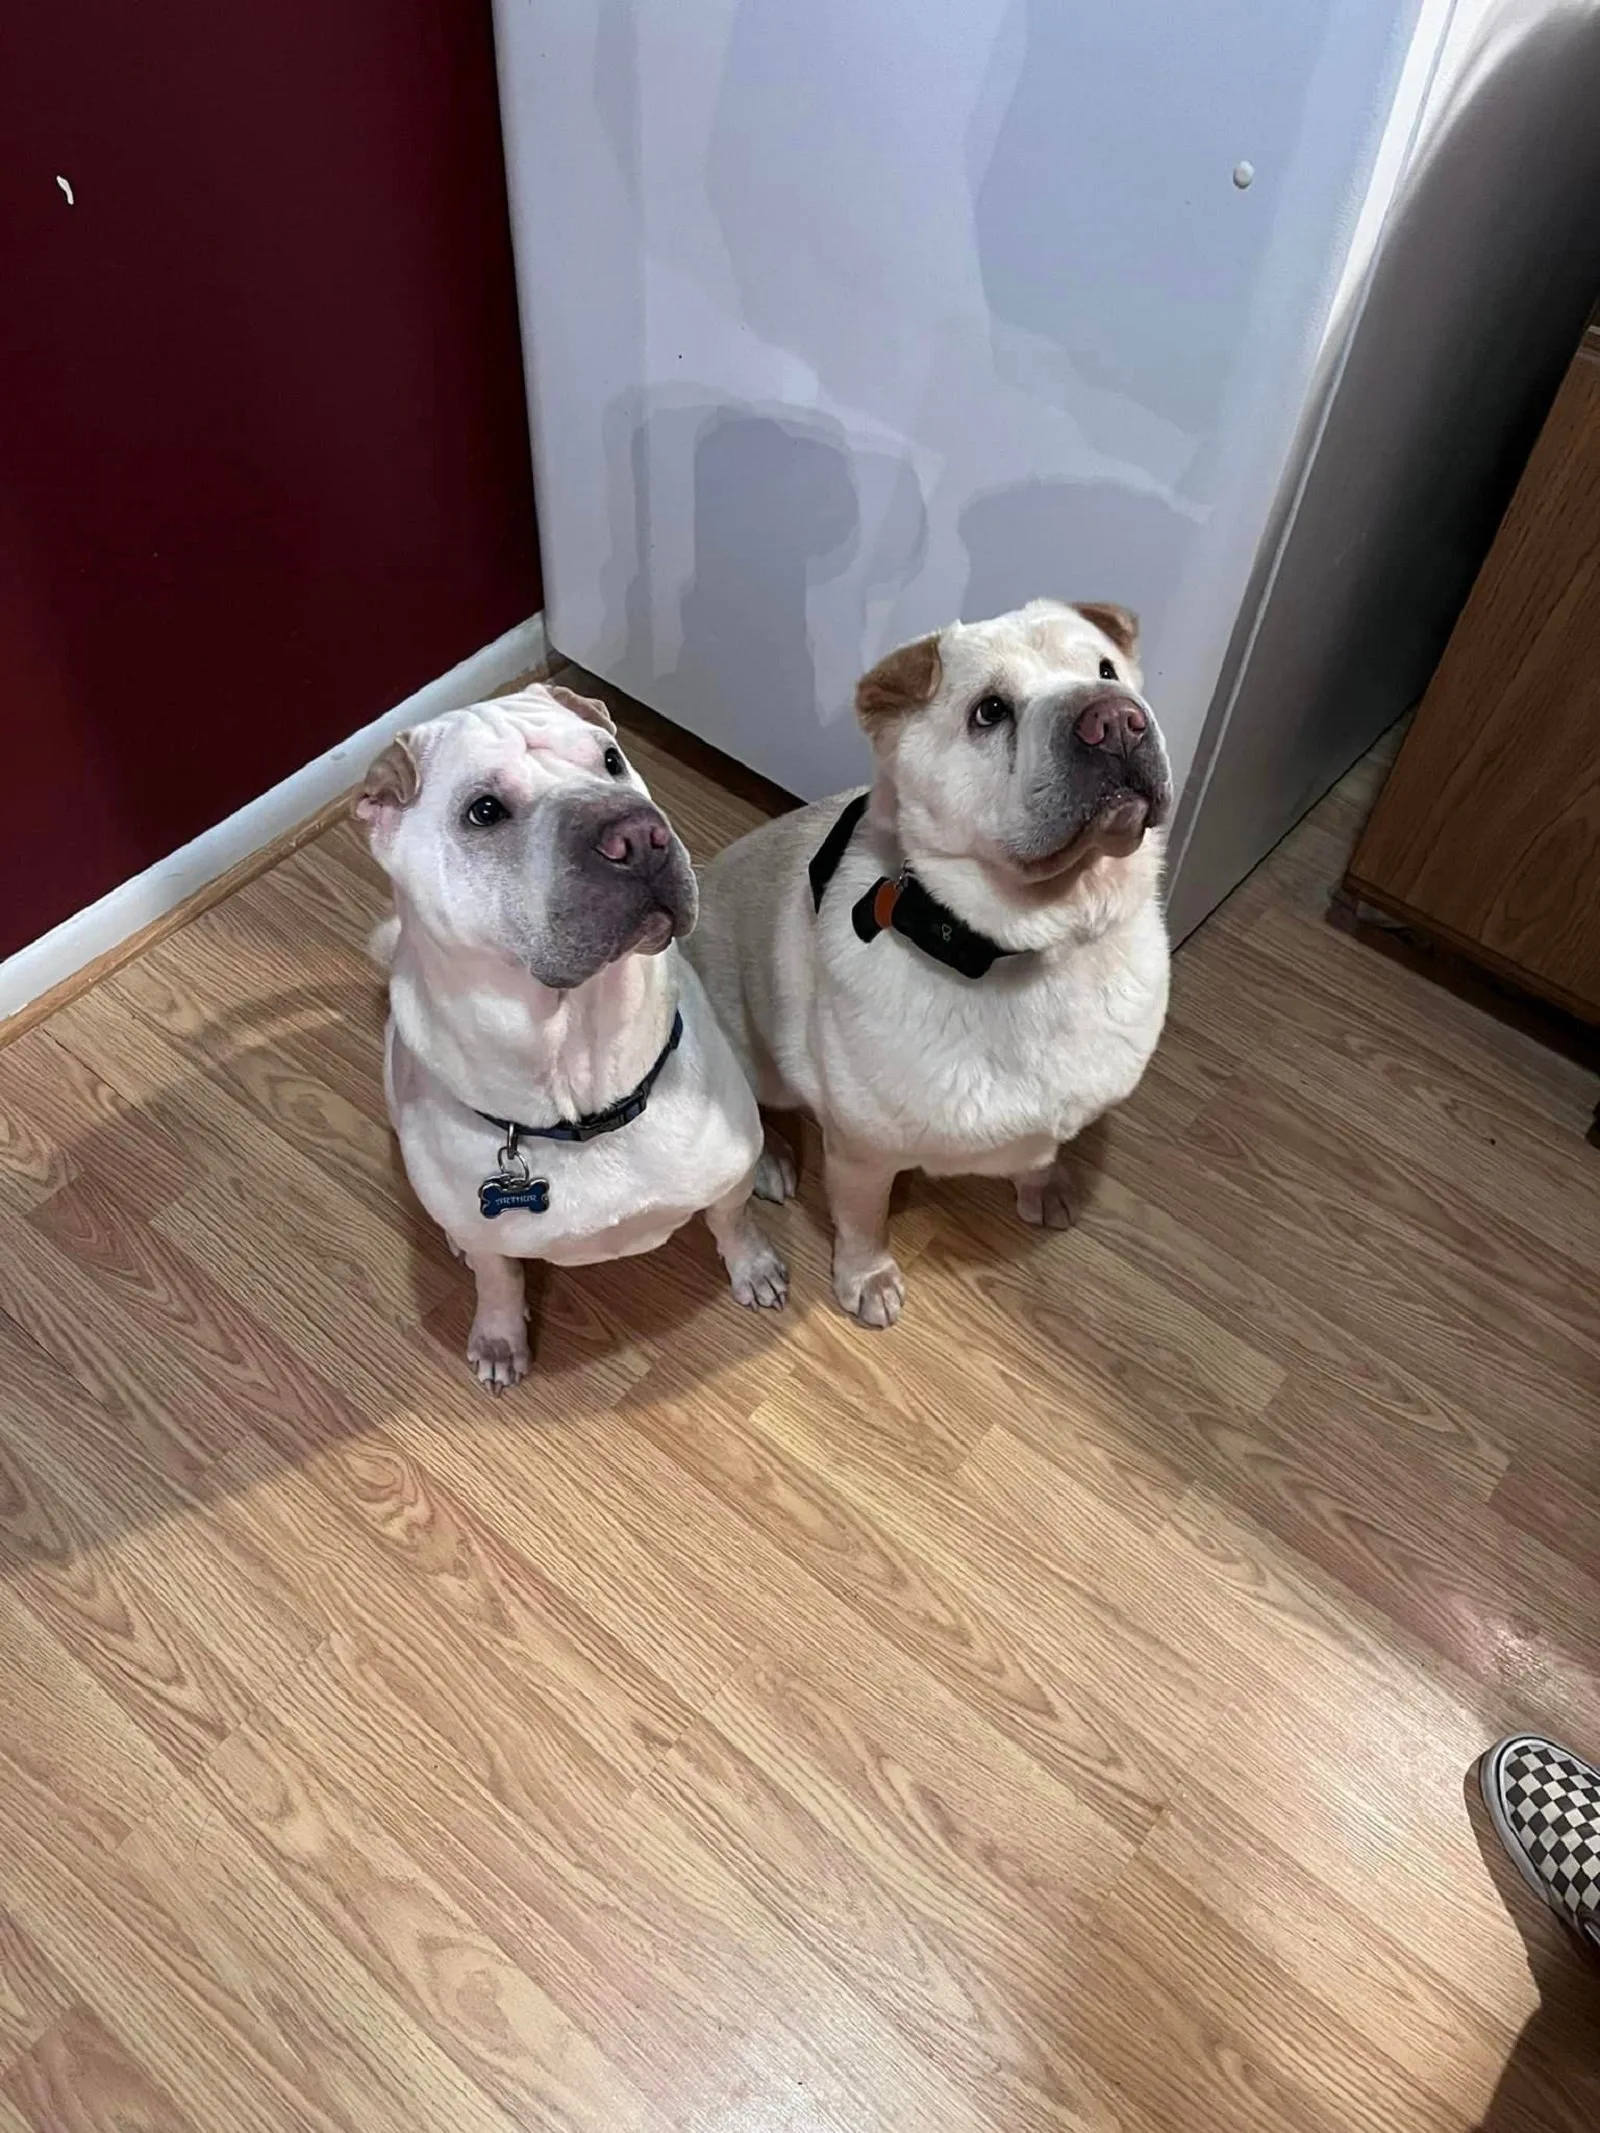 two similar dogs sitting together on the floor